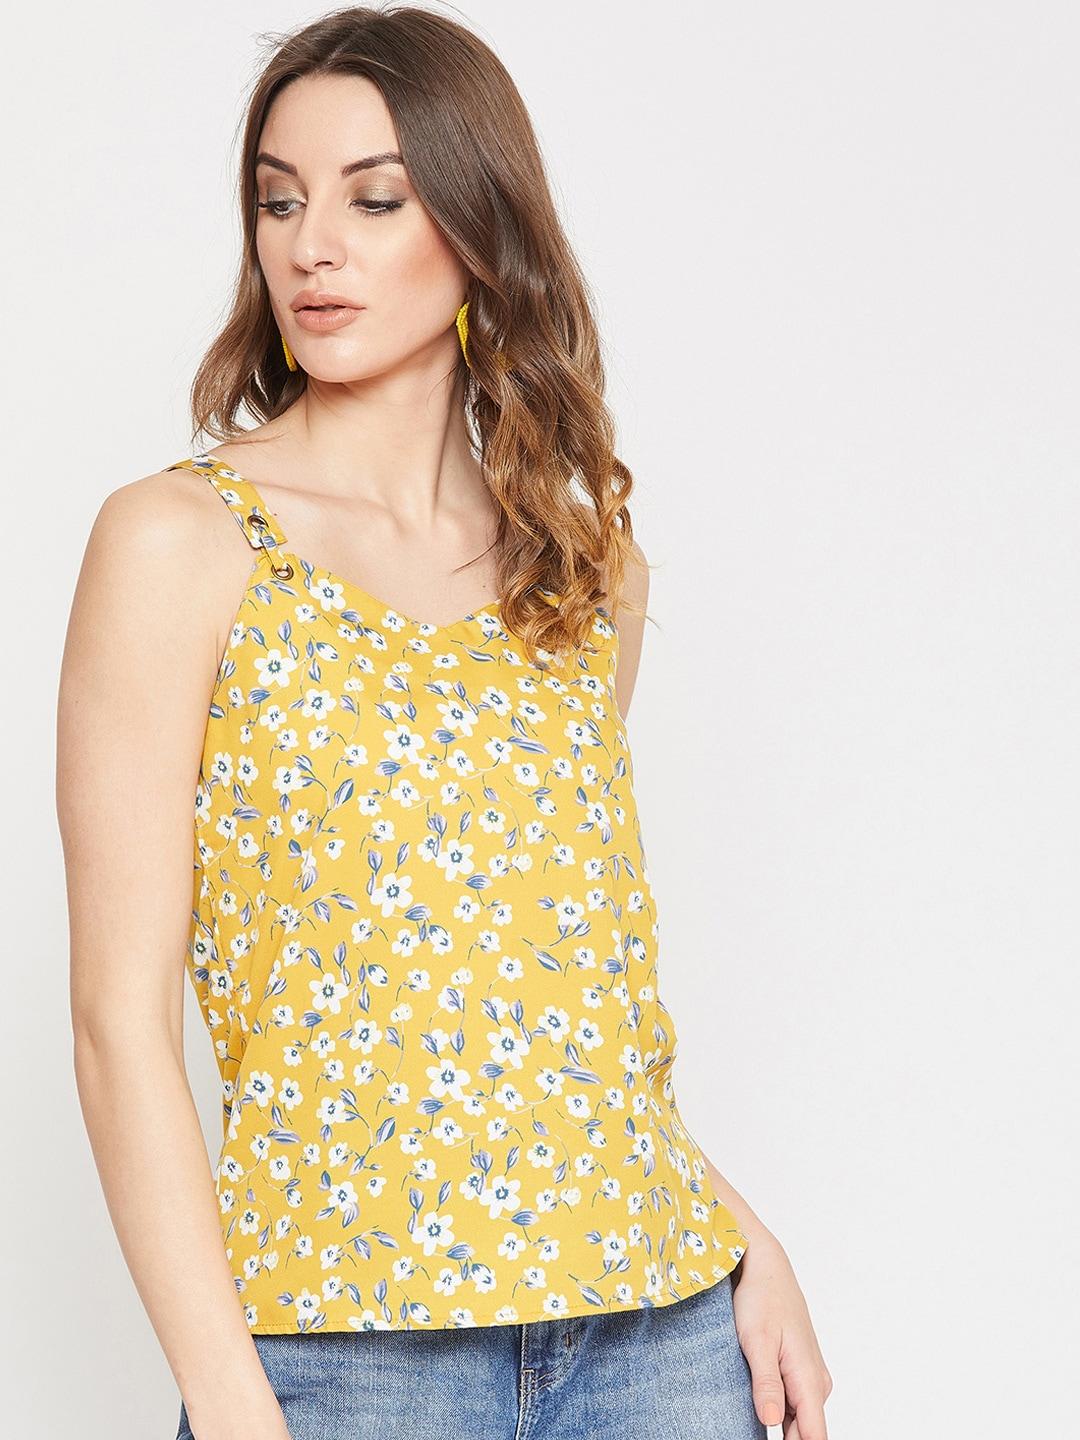 marie claire women yellow printed top